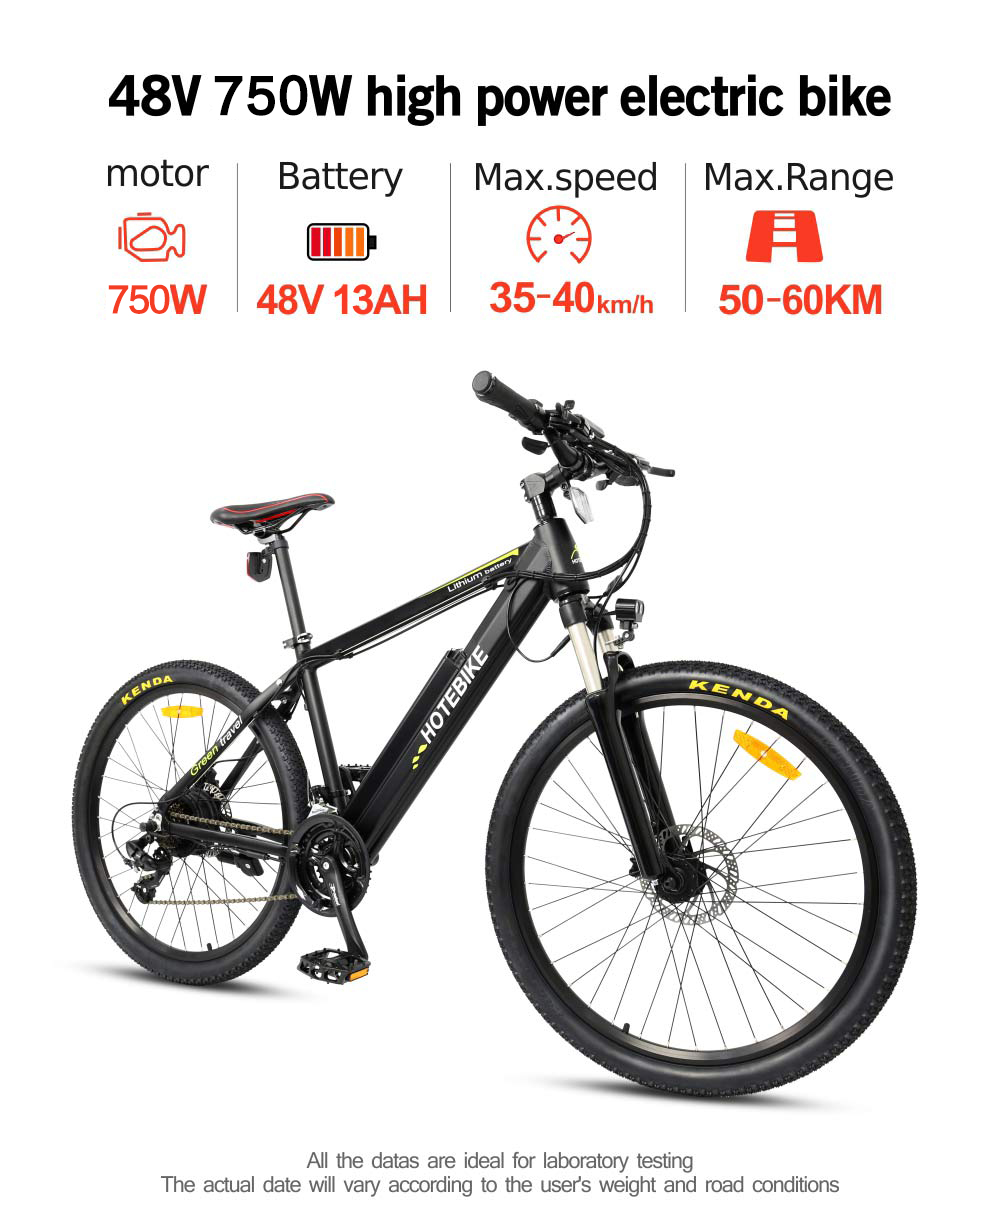 Hot sale electric bikes High-power electric bicycles in 2019-2020 - News - 2